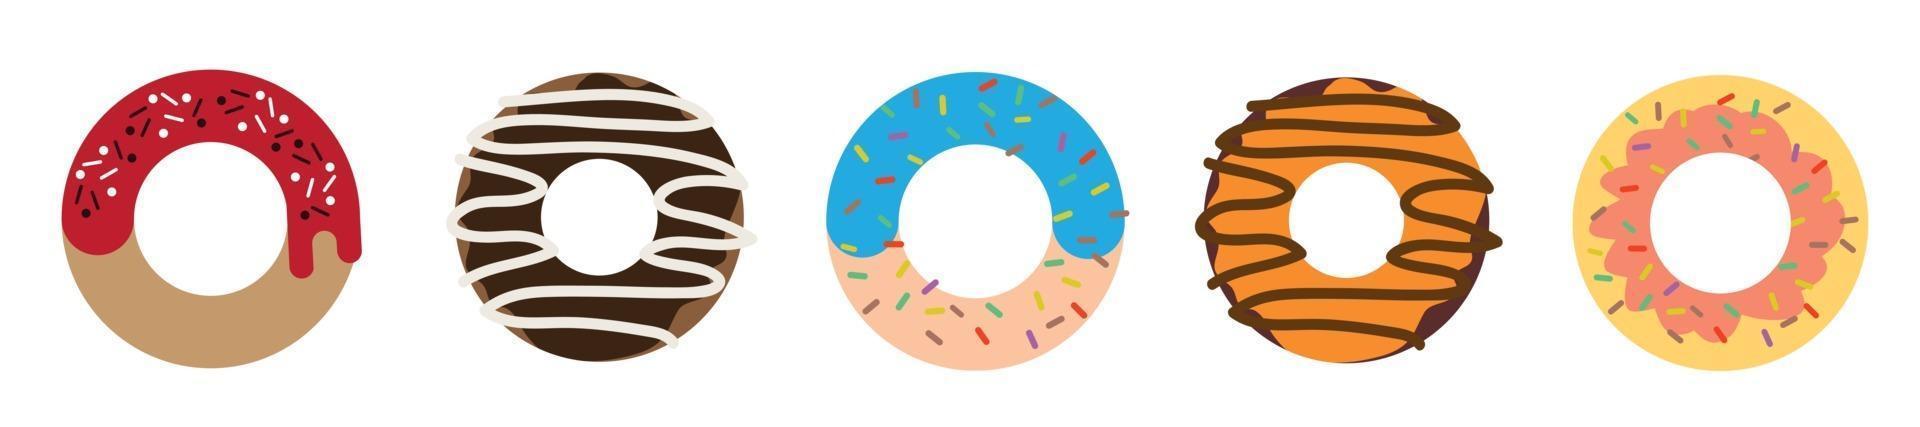 Donut vector set on a white background.